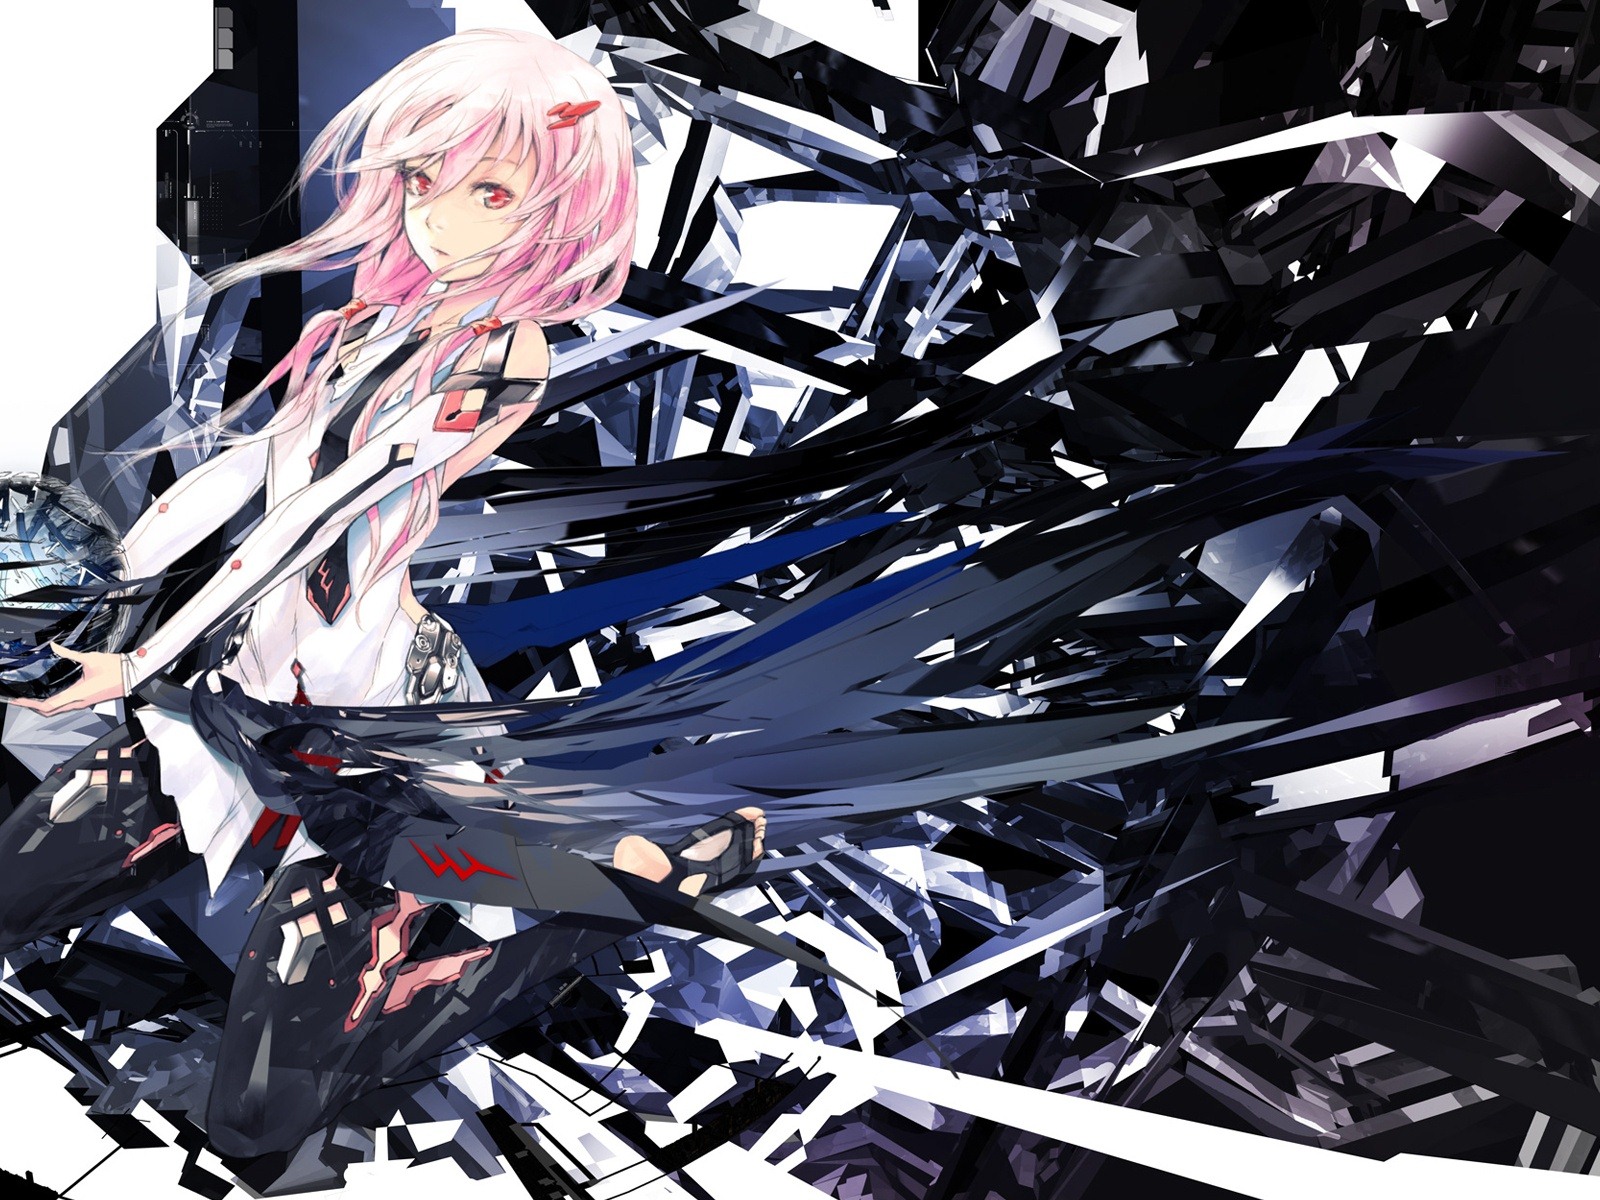 Guilty Crown 罪恶王冠 高清壁纸5 - 1600x1200